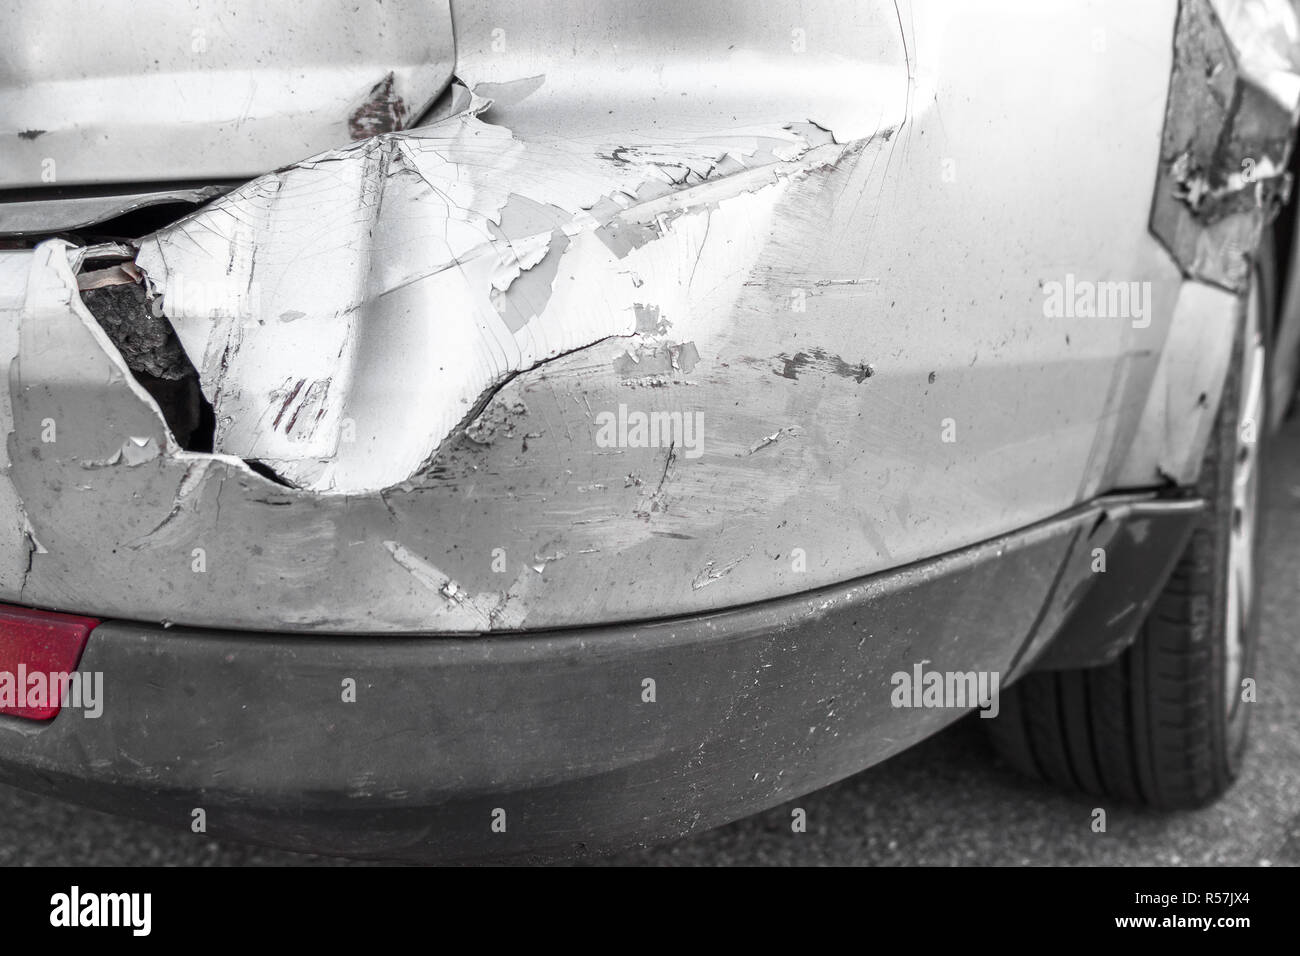 Silver car with rear part damaged in crash accident or collision with scratched paint and dented rear bumper metal body. Stock Photo